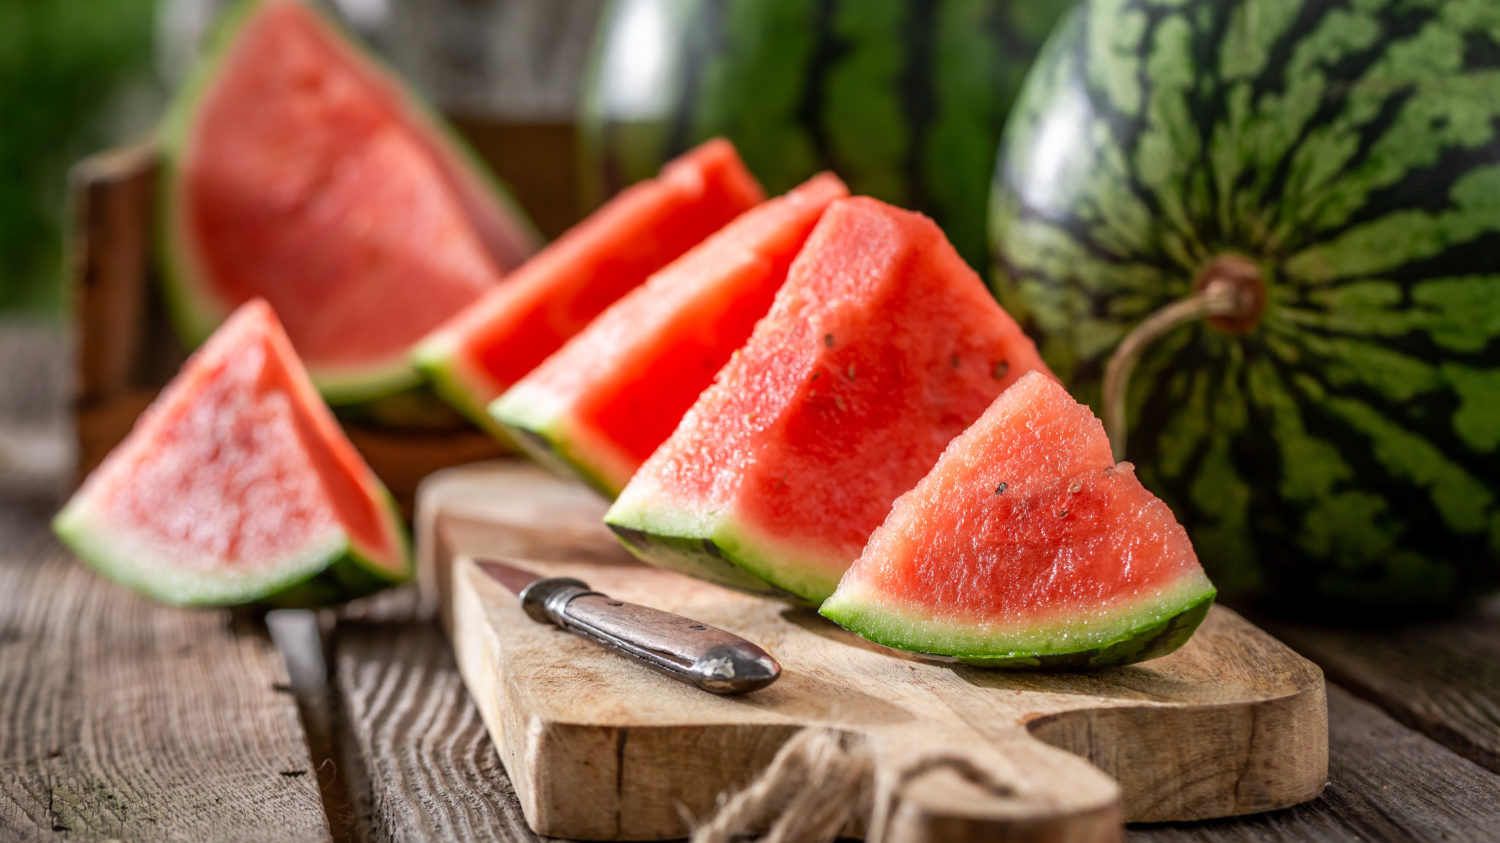 How To Pick A Good Watermelon At The Grocery Store